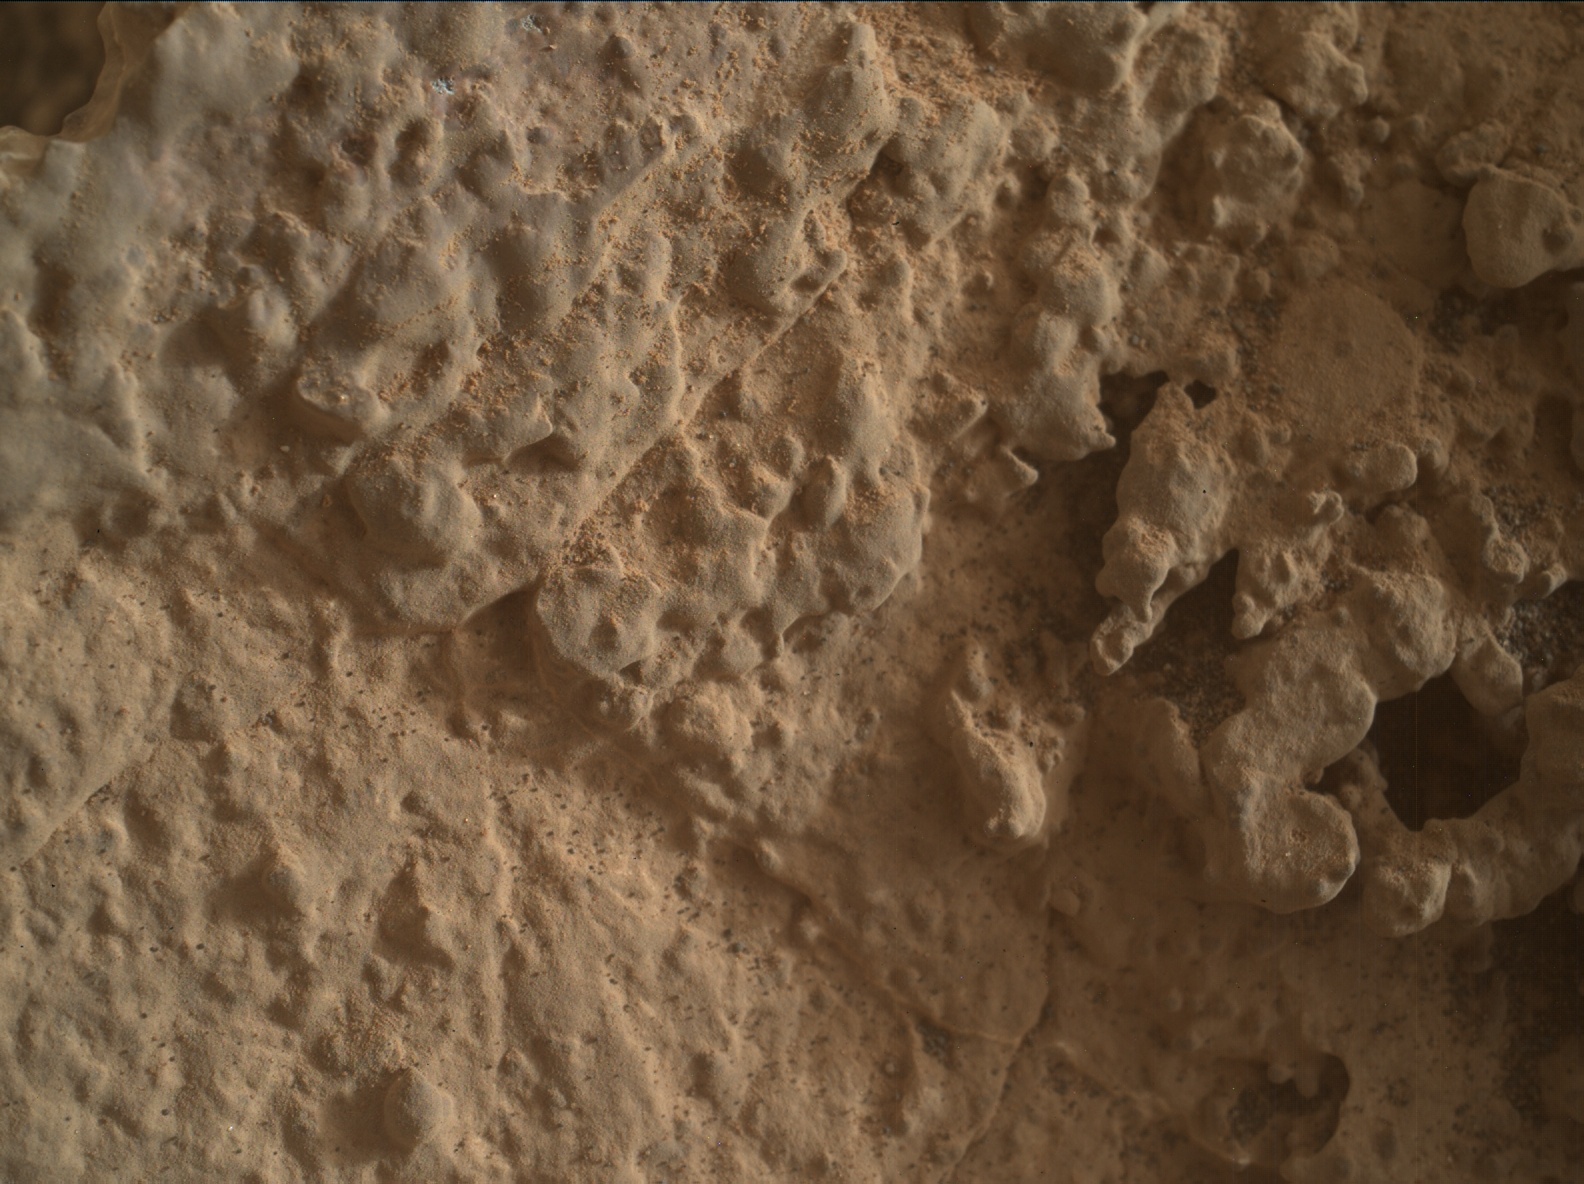 Nasa's Mars rover Curiosity acquired this image using its Mars Hand Lens Imager (MAHLI) on Sol 3532